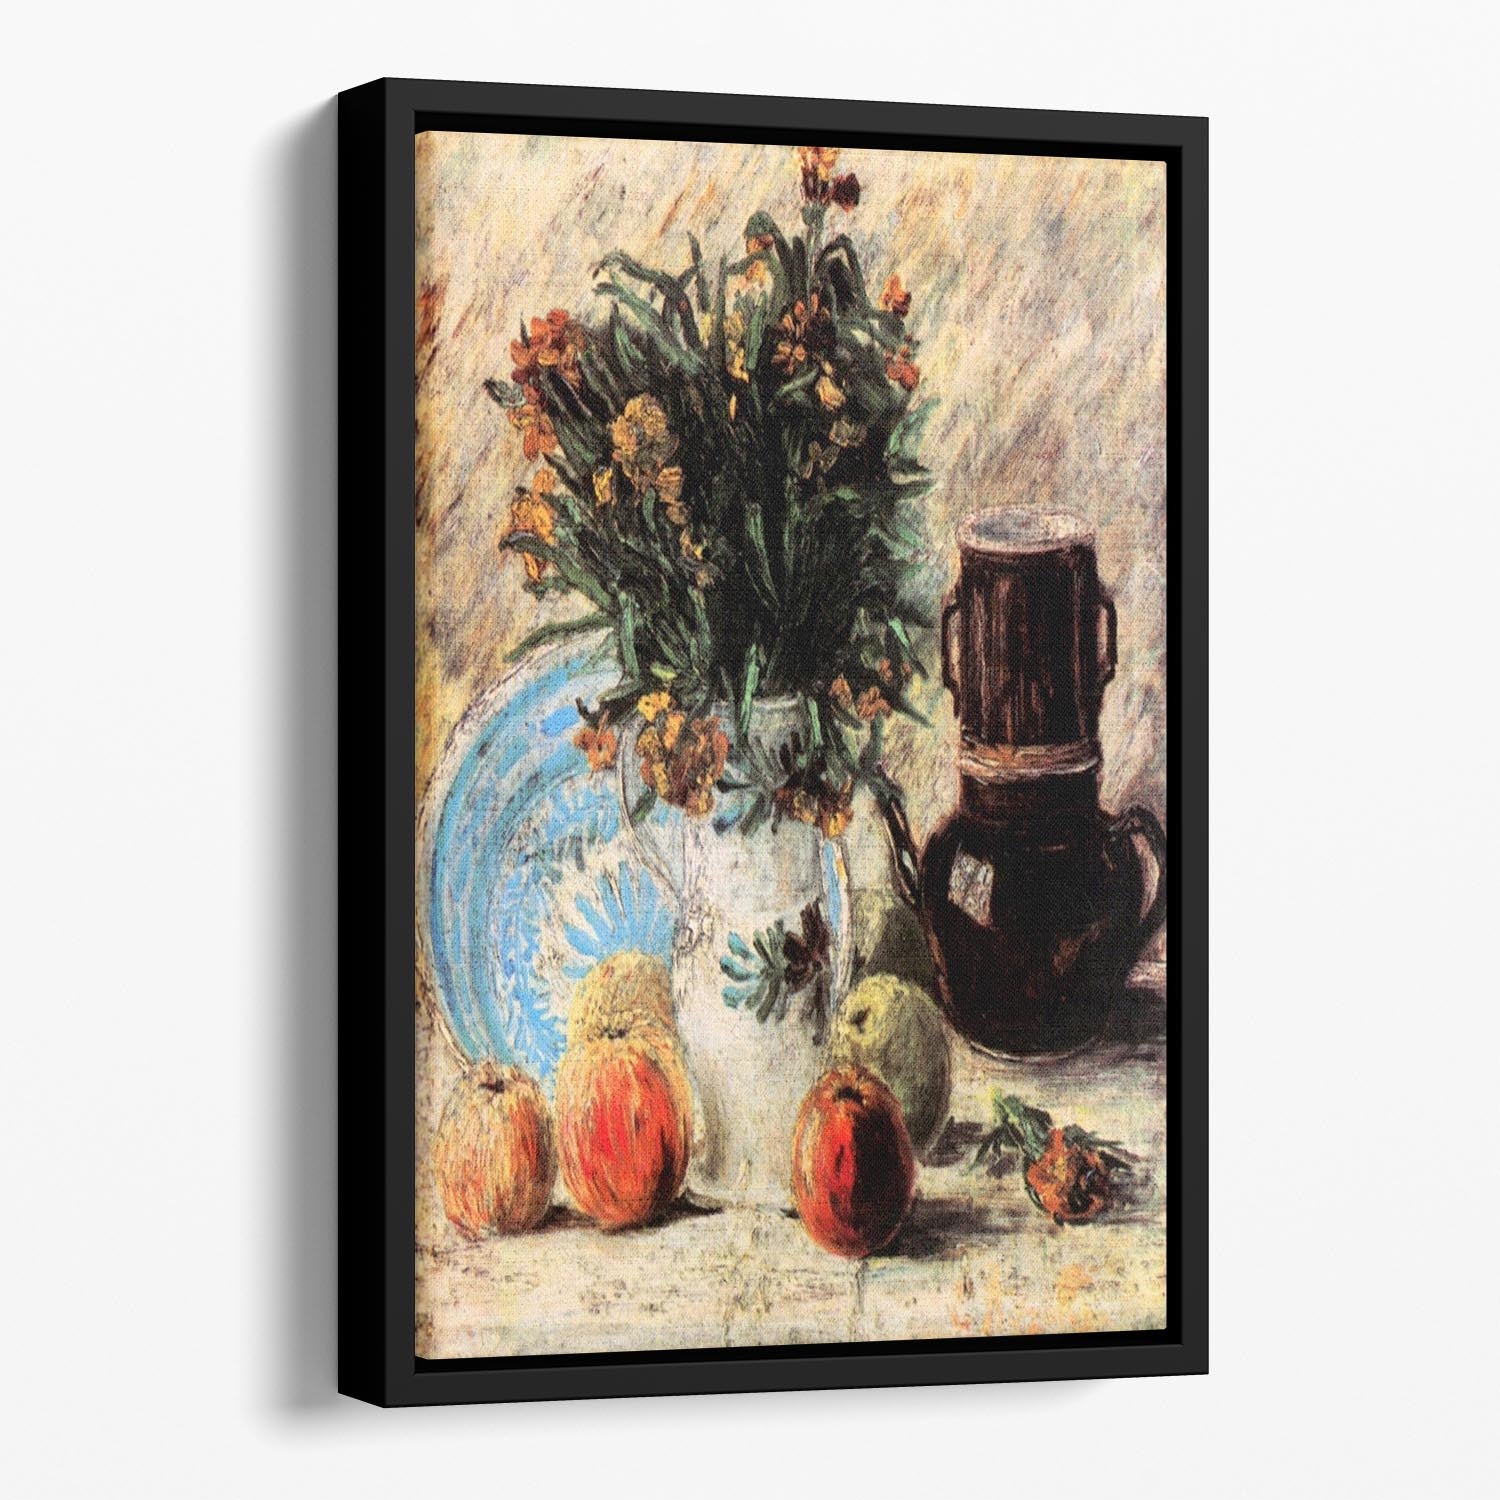 Vase with Flowers Coffeepot and Fruit by Van Gogh Floating Framed Canvas